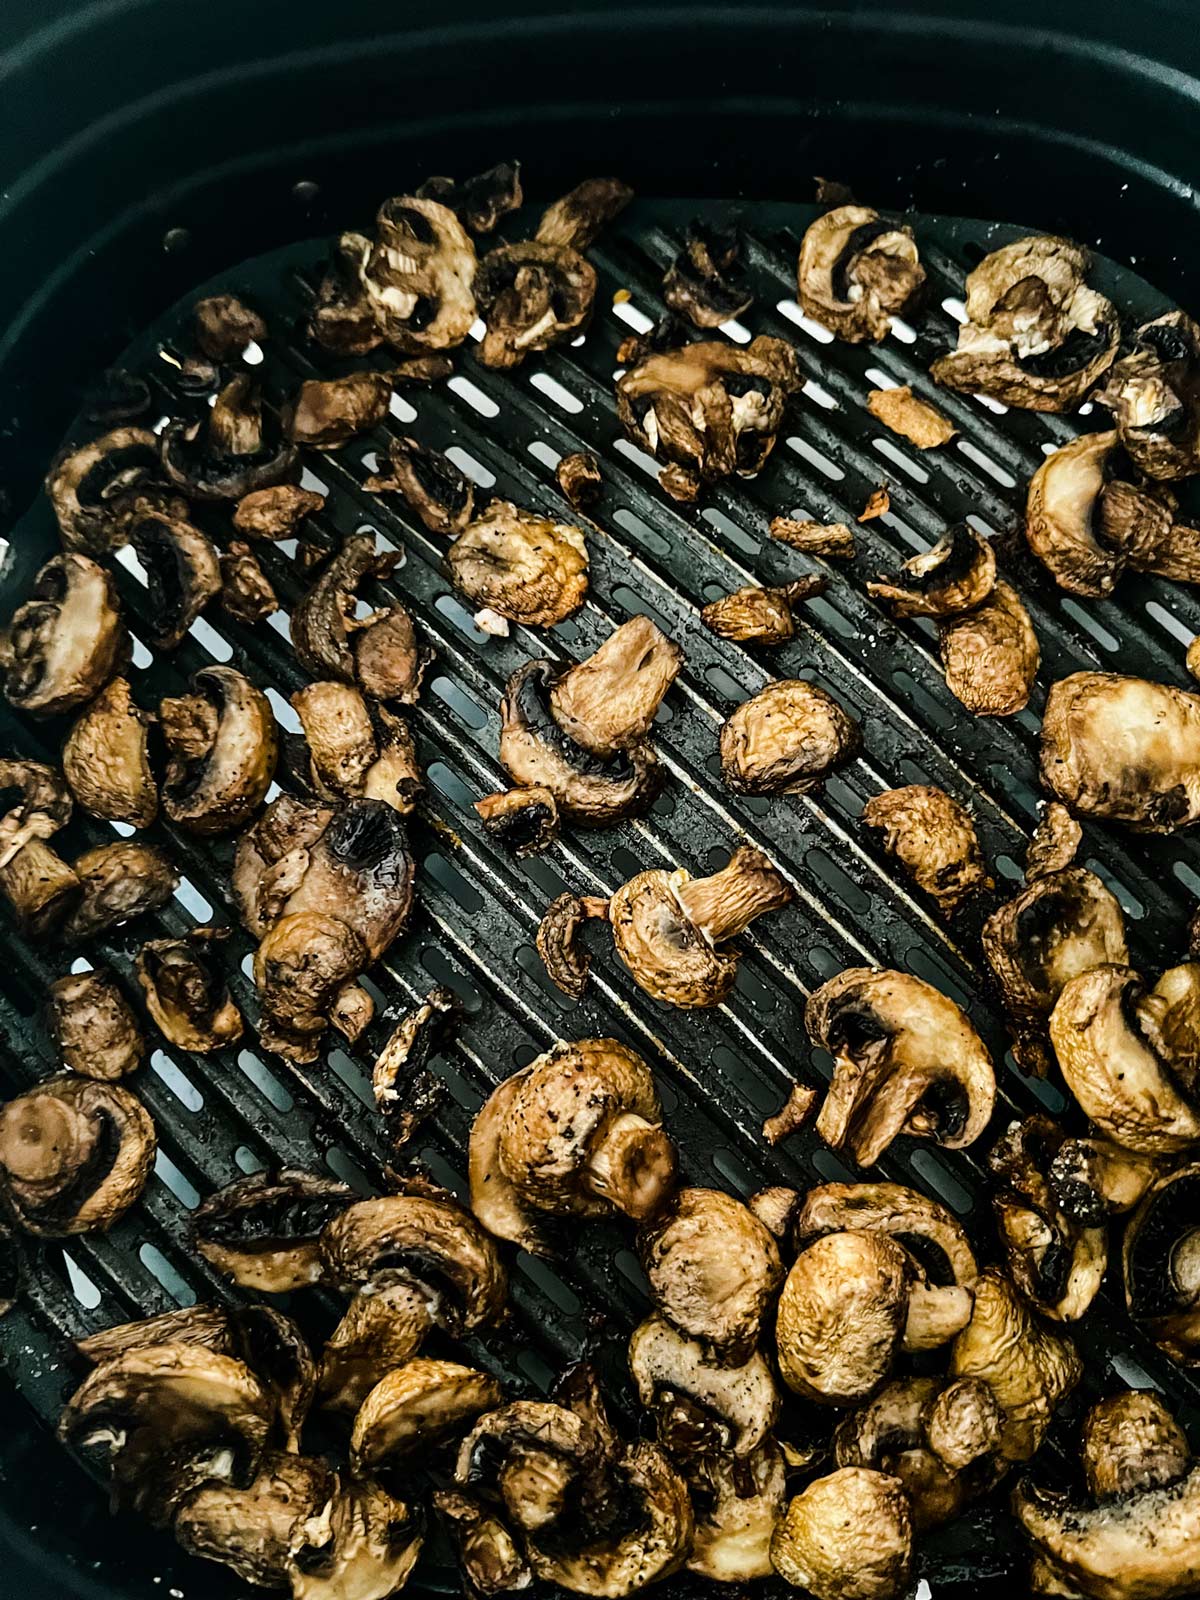 Cooked mushrooms in an air fryer.